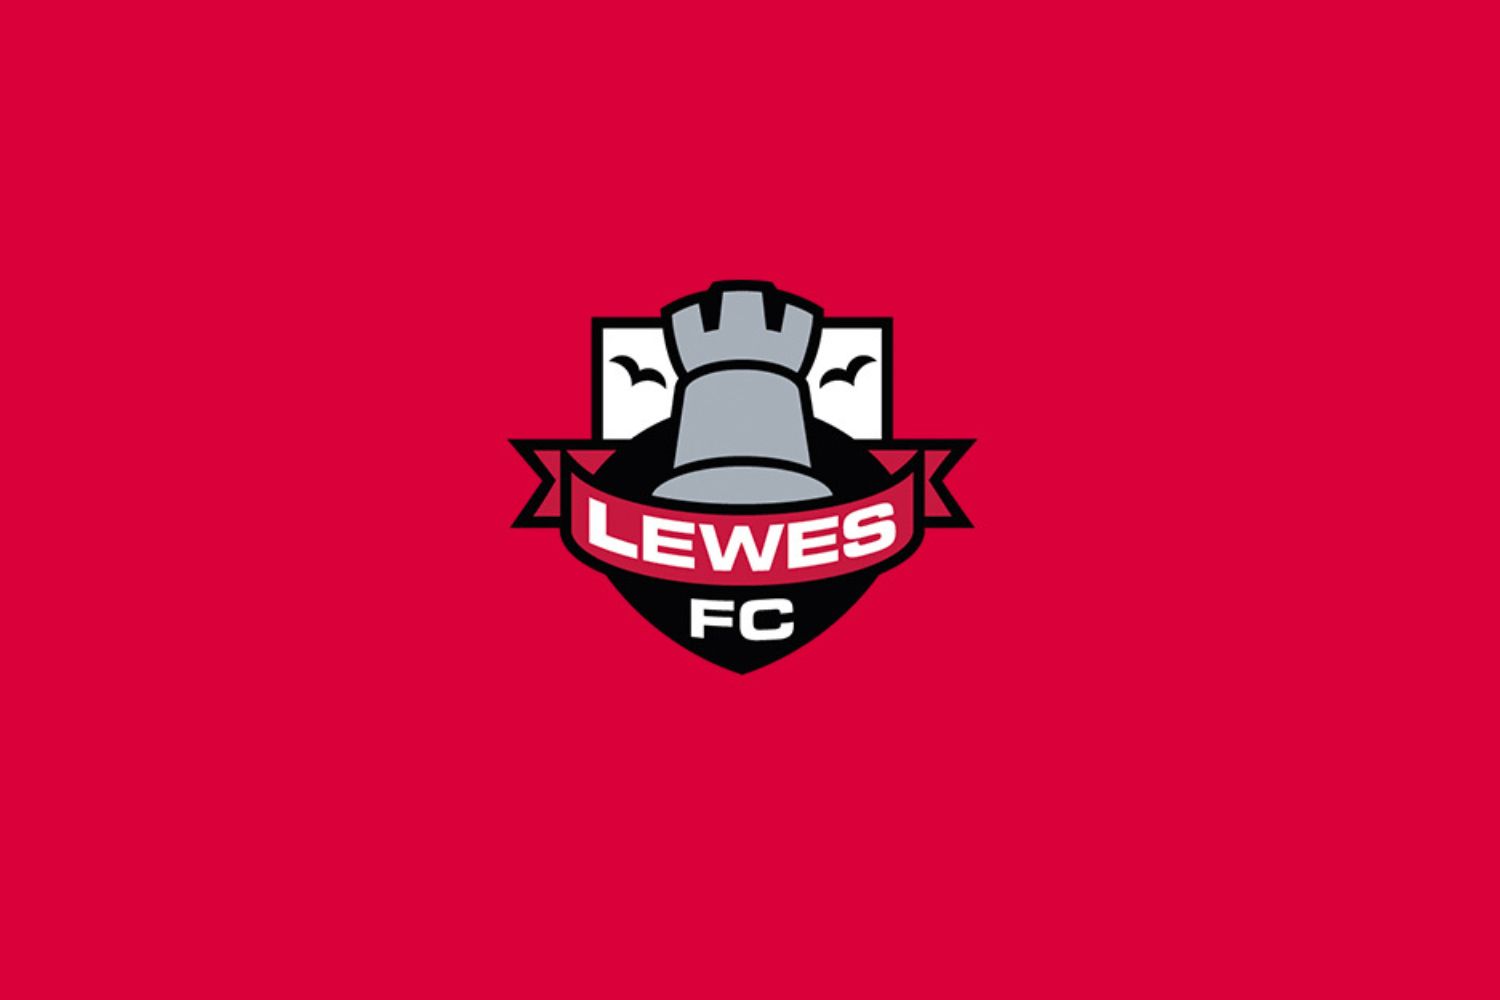 Lewes FC 15 Football Club Facts